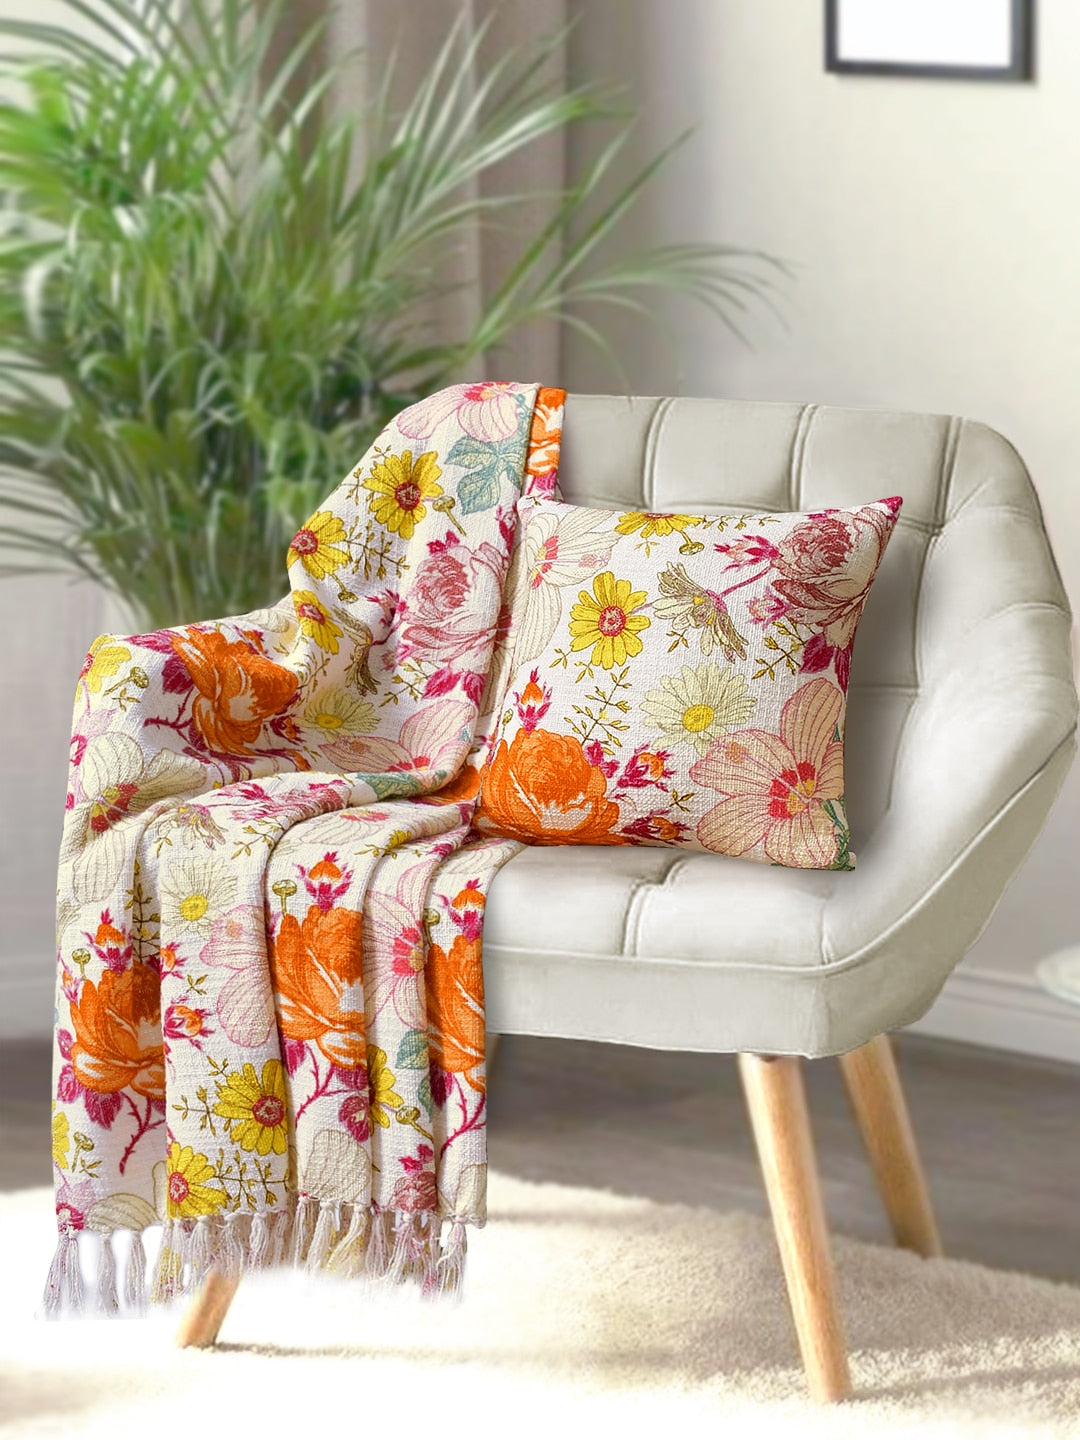 Floral Garden Cotton Printed Throw with Cushion Cover